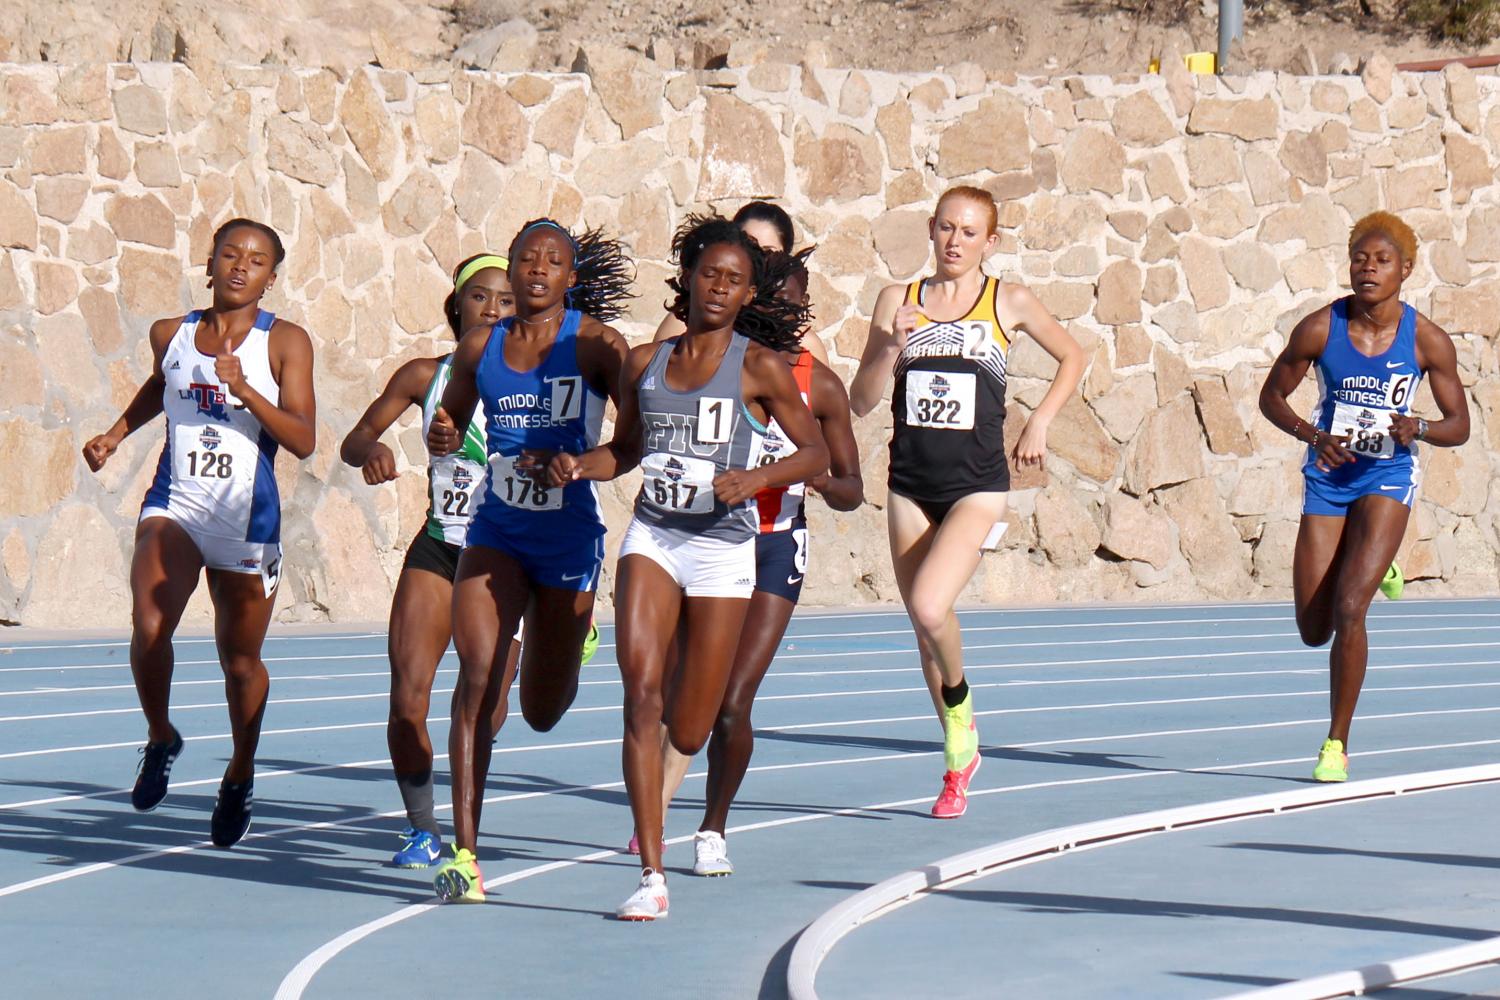 Nine+Miners+set+to+compete+at+the+NCAA+Outdoor+Track+and+Field+Championships